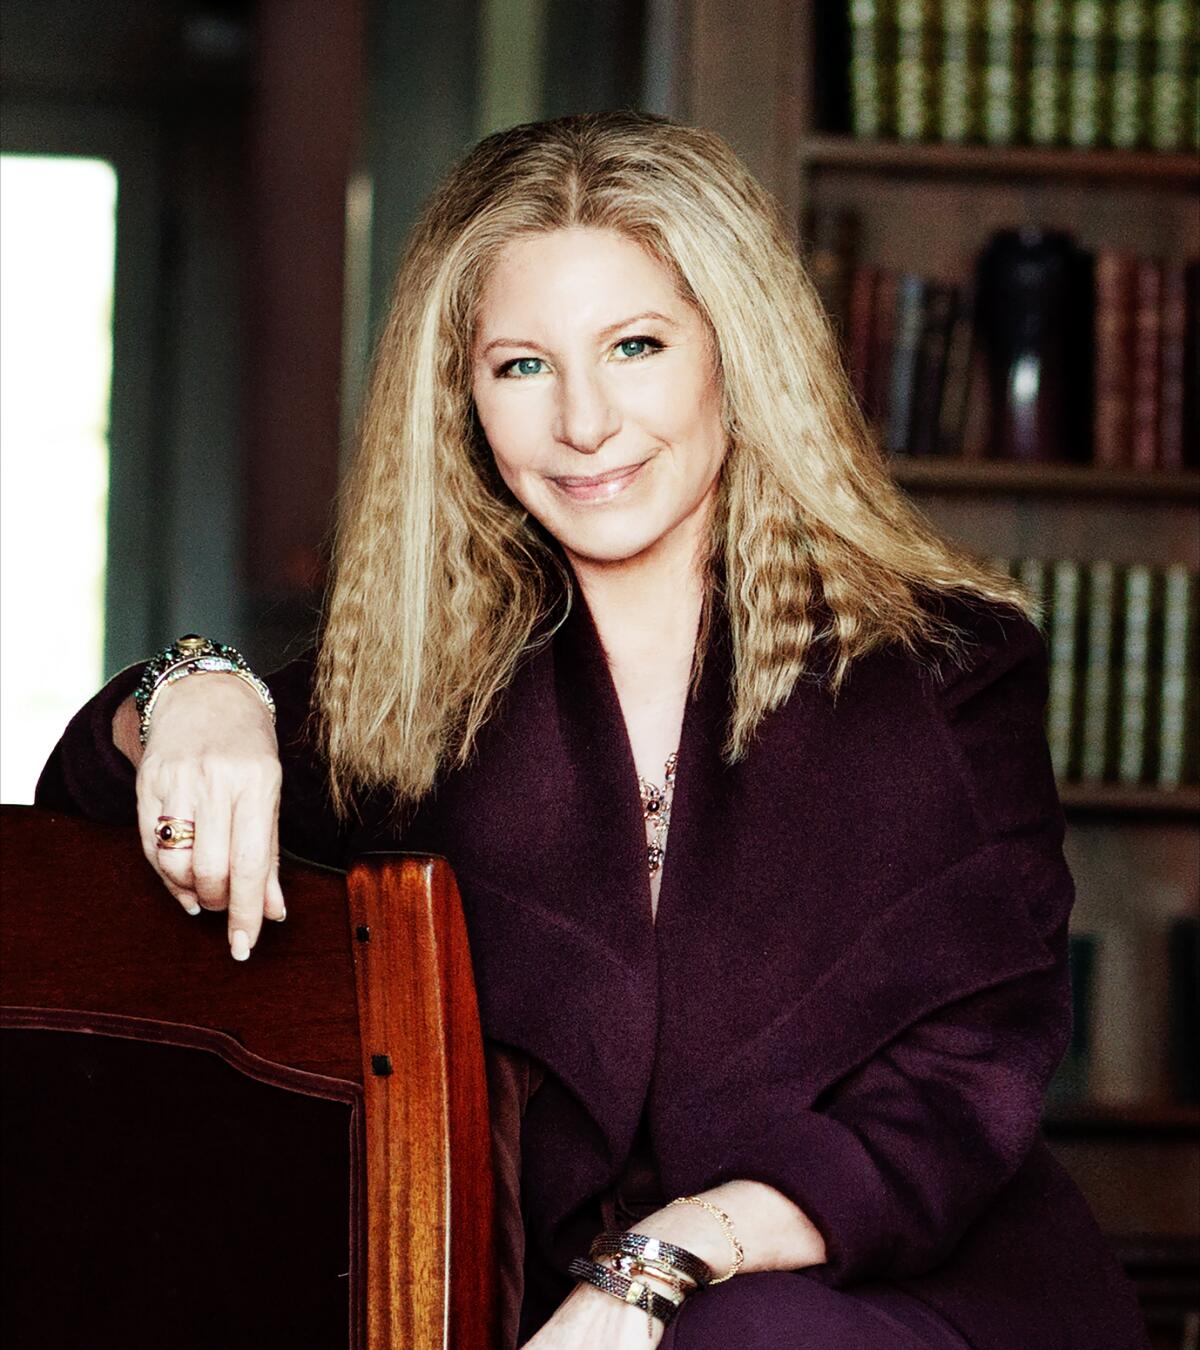 Barbra Streisand rests her arm on the back of the wooden chair she's sitting in for a portrait.